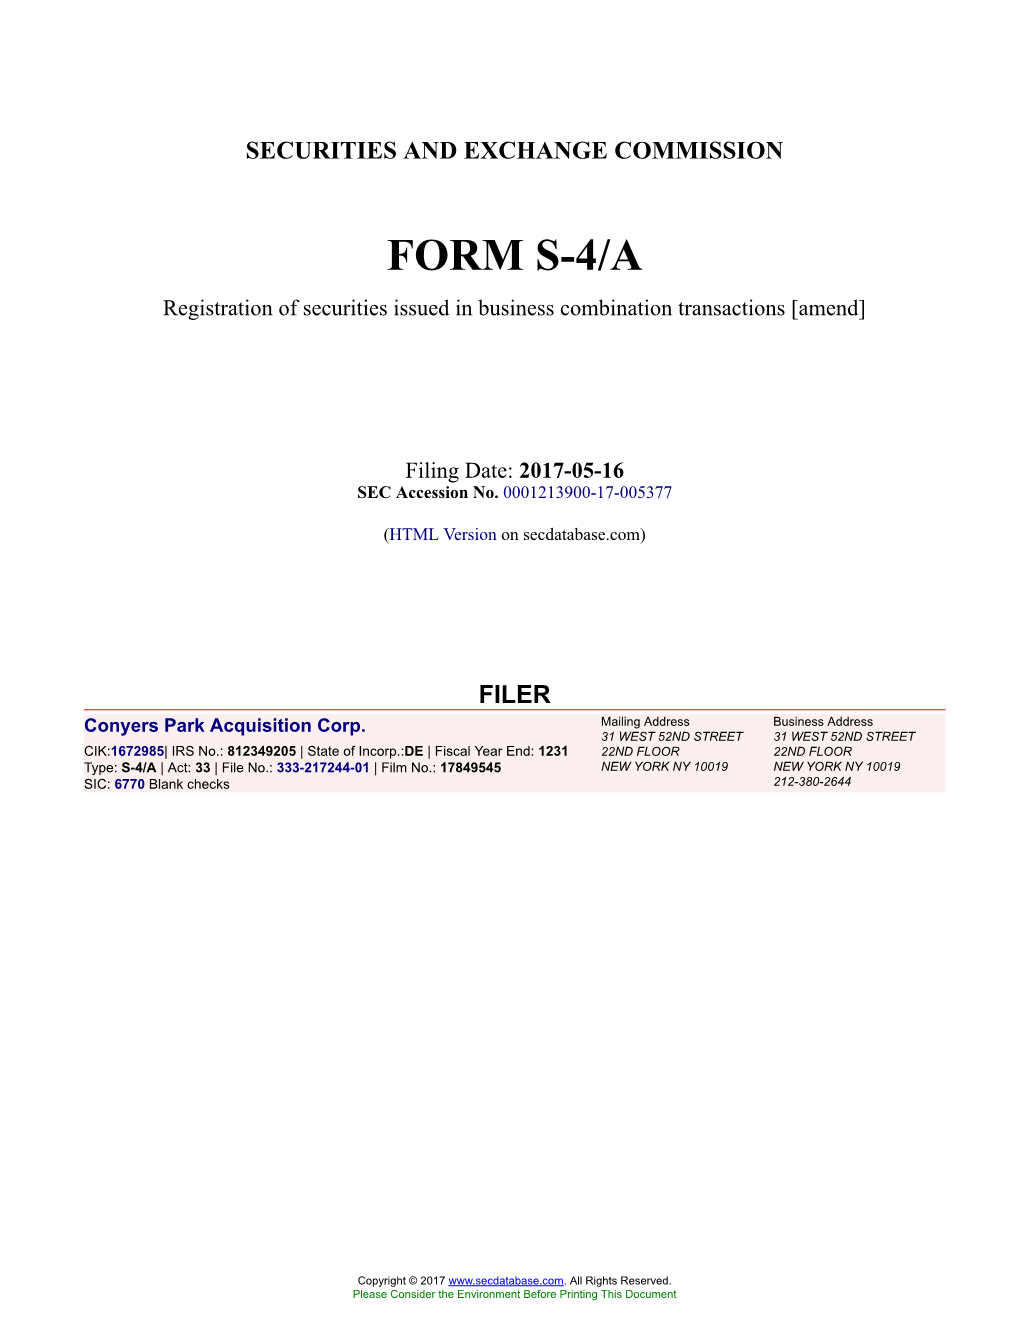 Conyers Park Acquisition Corp. Form S-4/A Filed 2017-05-16